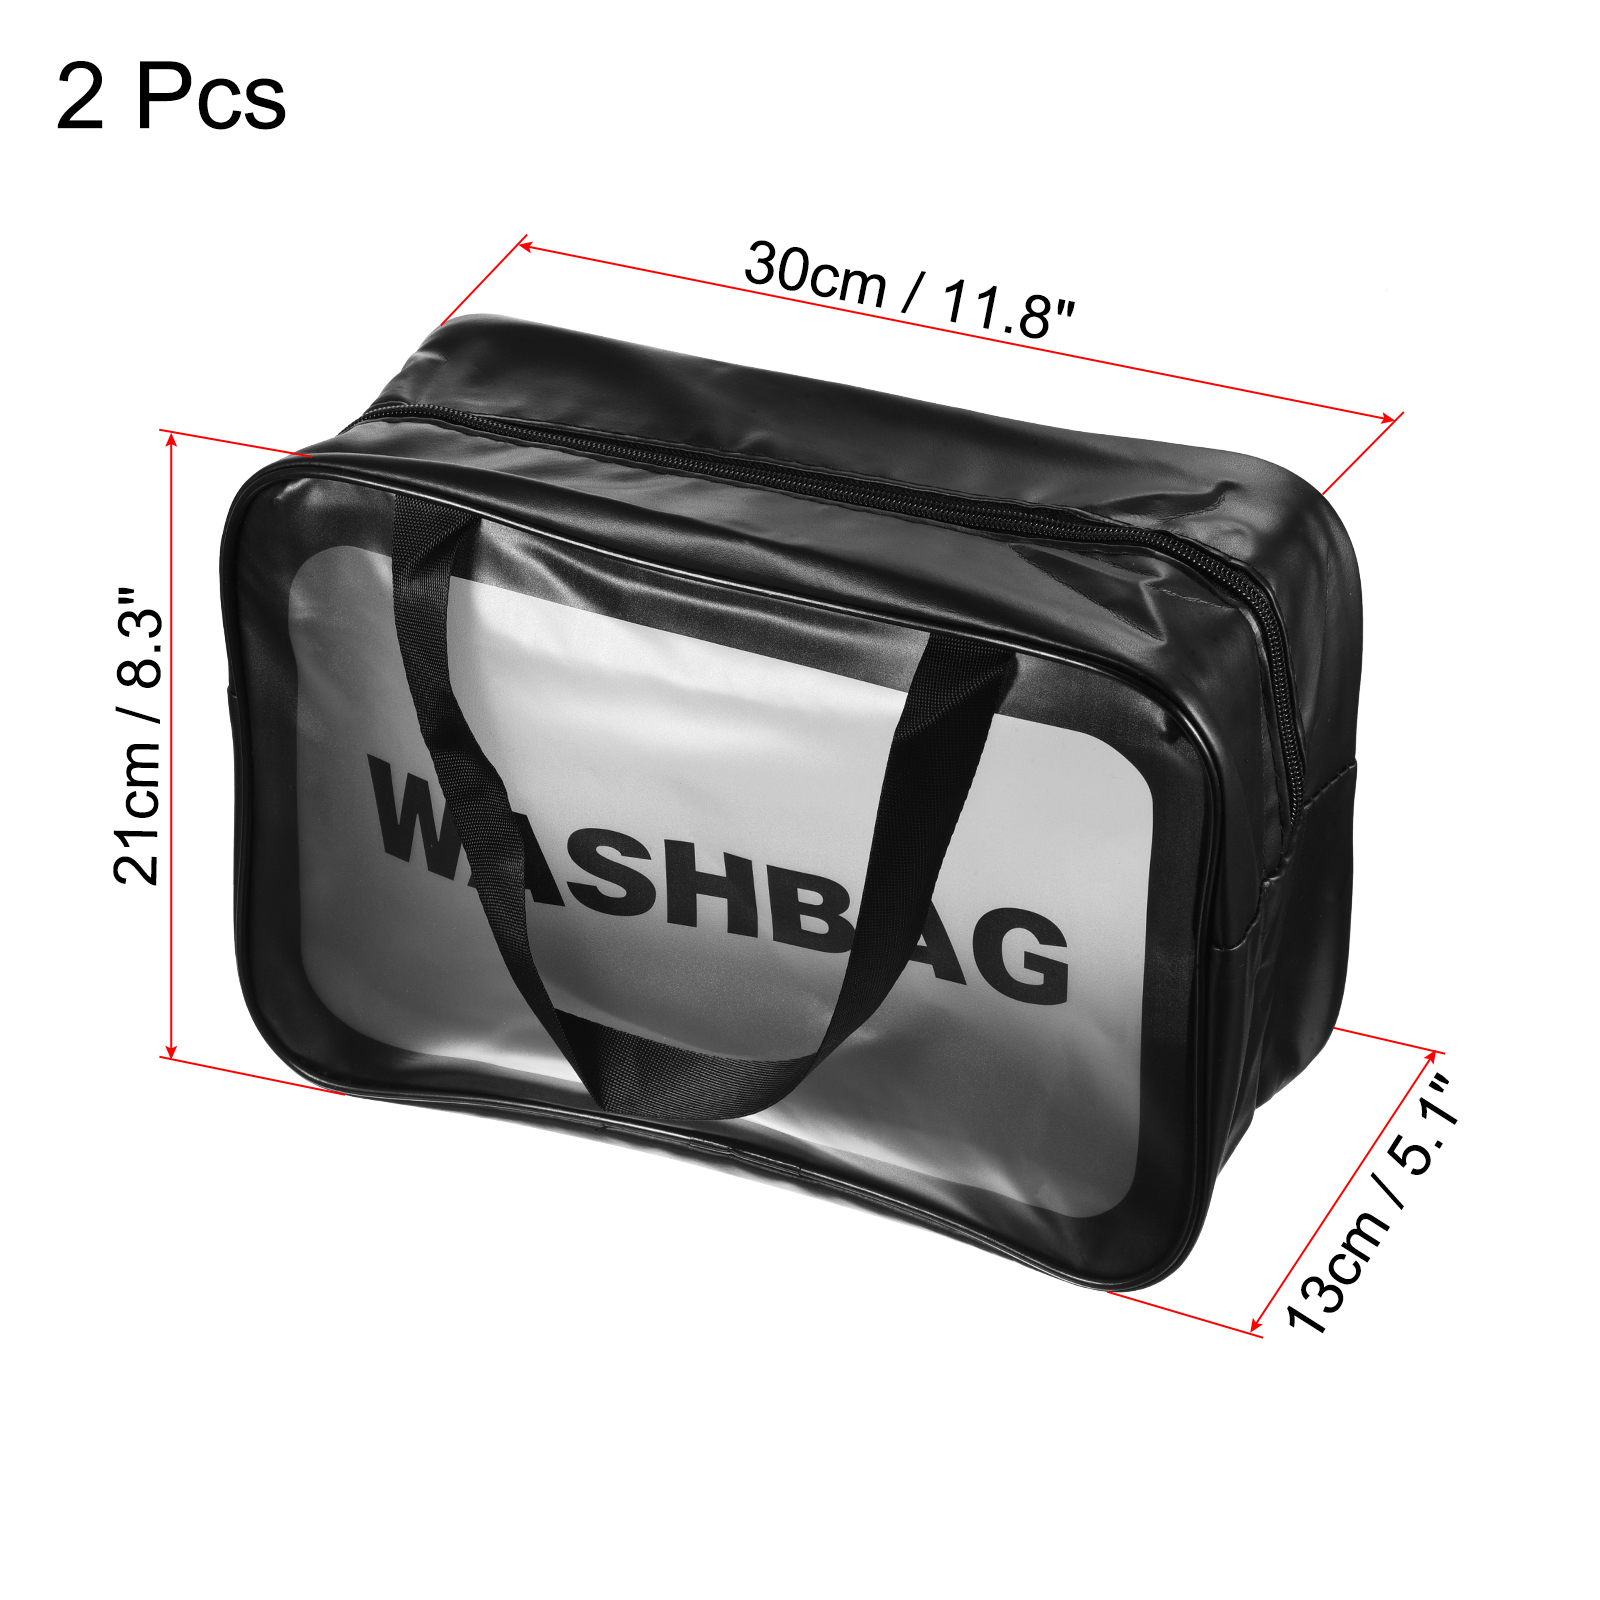 Uxcell 8.3"x11.8"x5.1" PVC Clear Toiletry Bag Makeup Bags with Zipper Handle Black 2 Pack - image 2 of 5